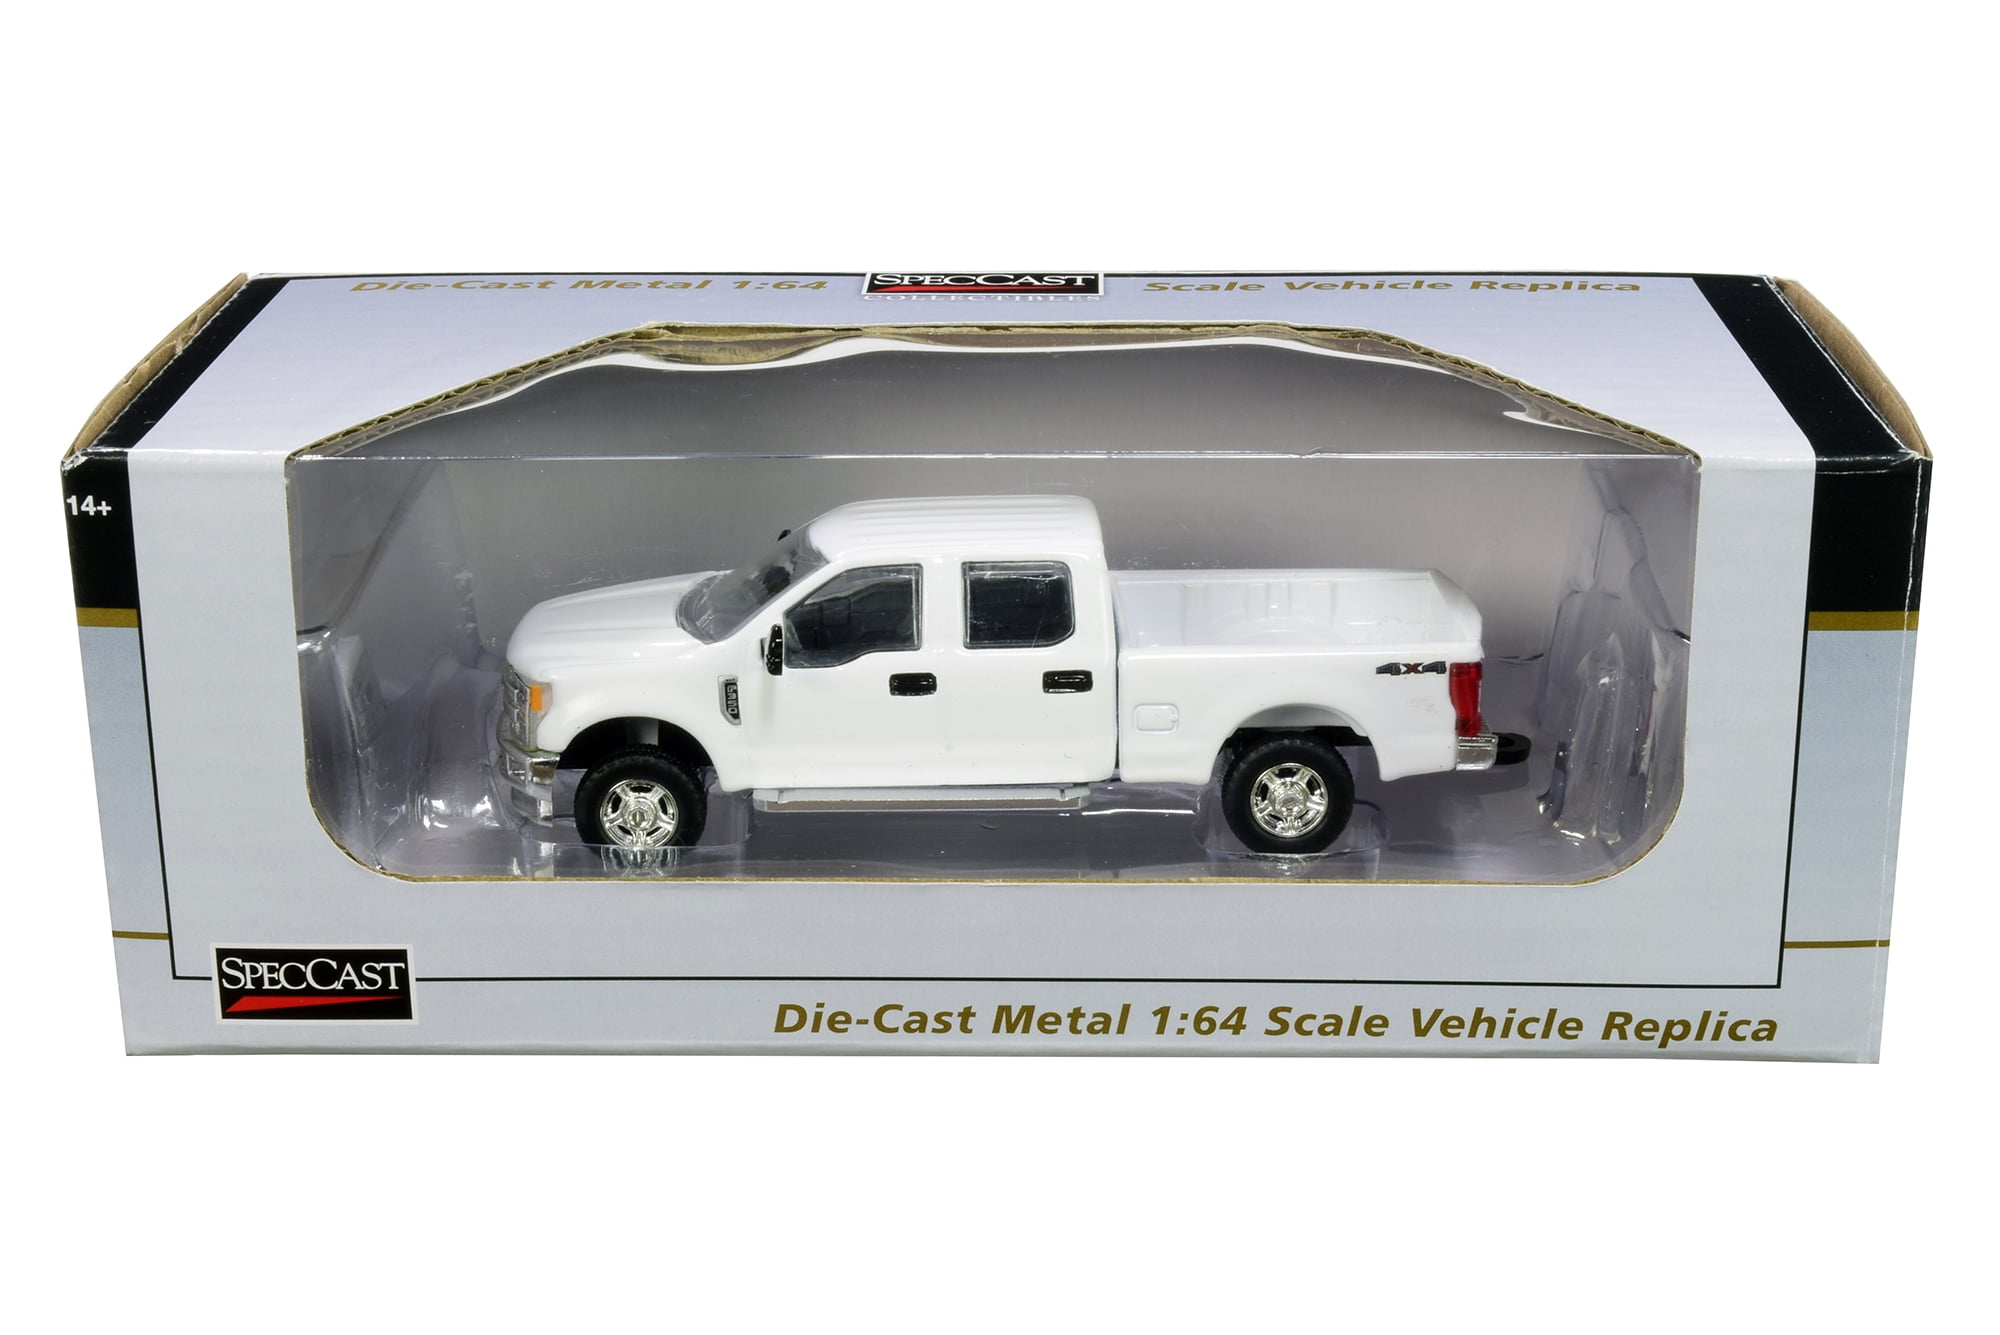 2019 Ford F-350 Dually & Flatbed Trailer & Rusty Truck Body 1:64 Scale Diecast 